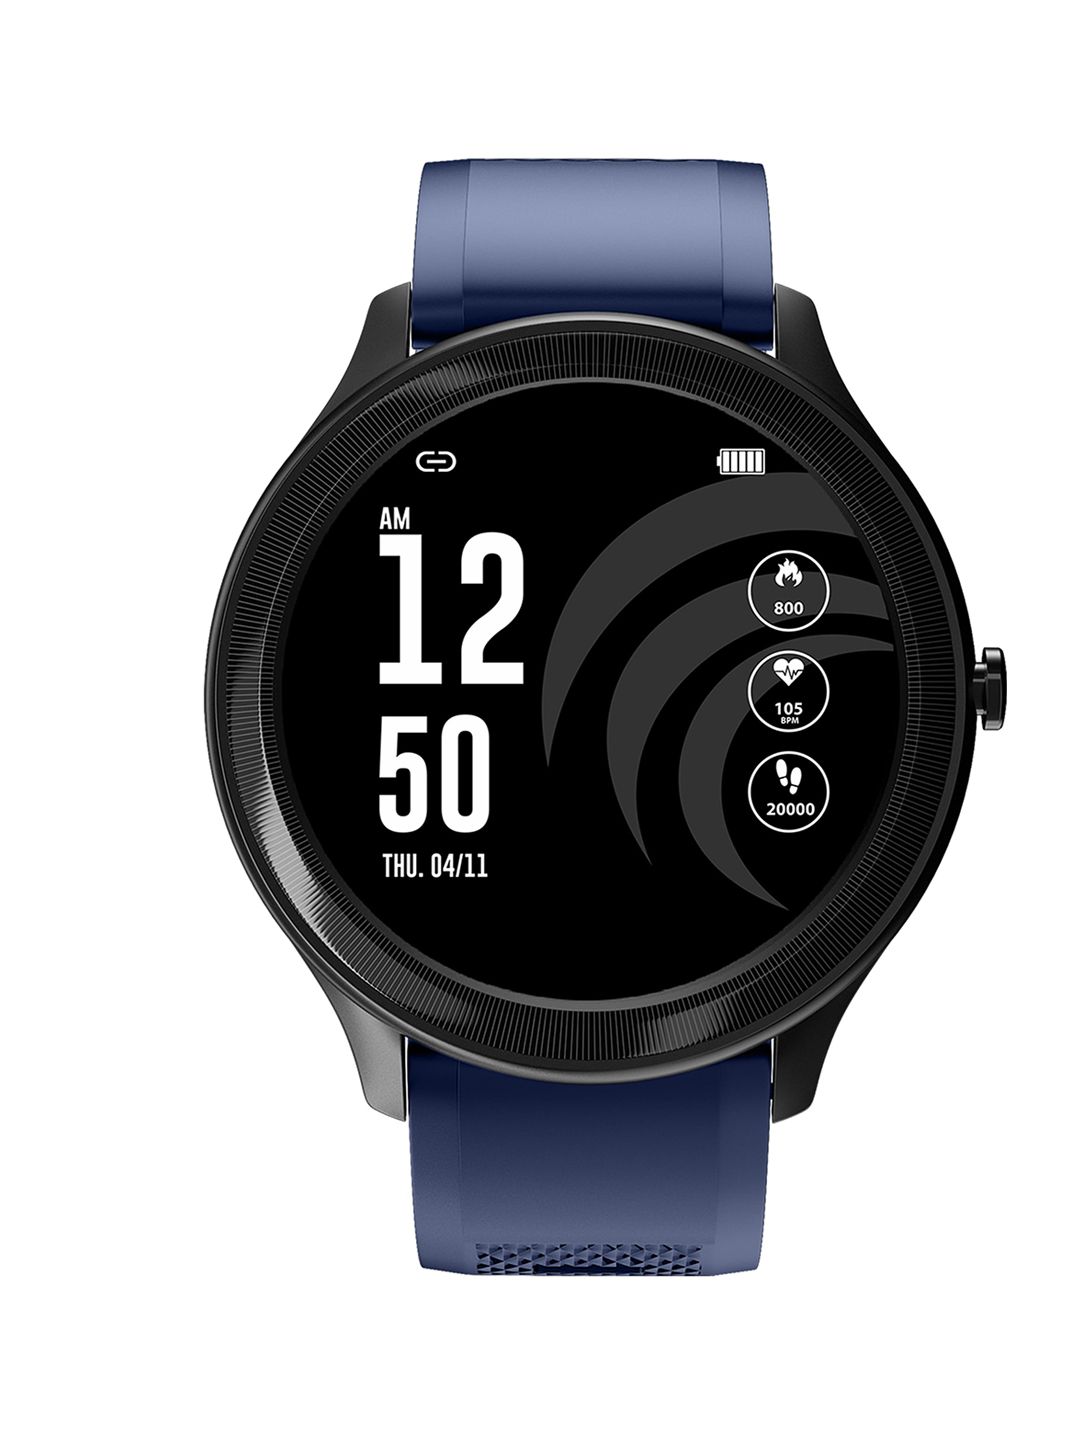 Cellecor Unisex Blue & Black Solid ActFit Smartwatch A3 PRO Price in India